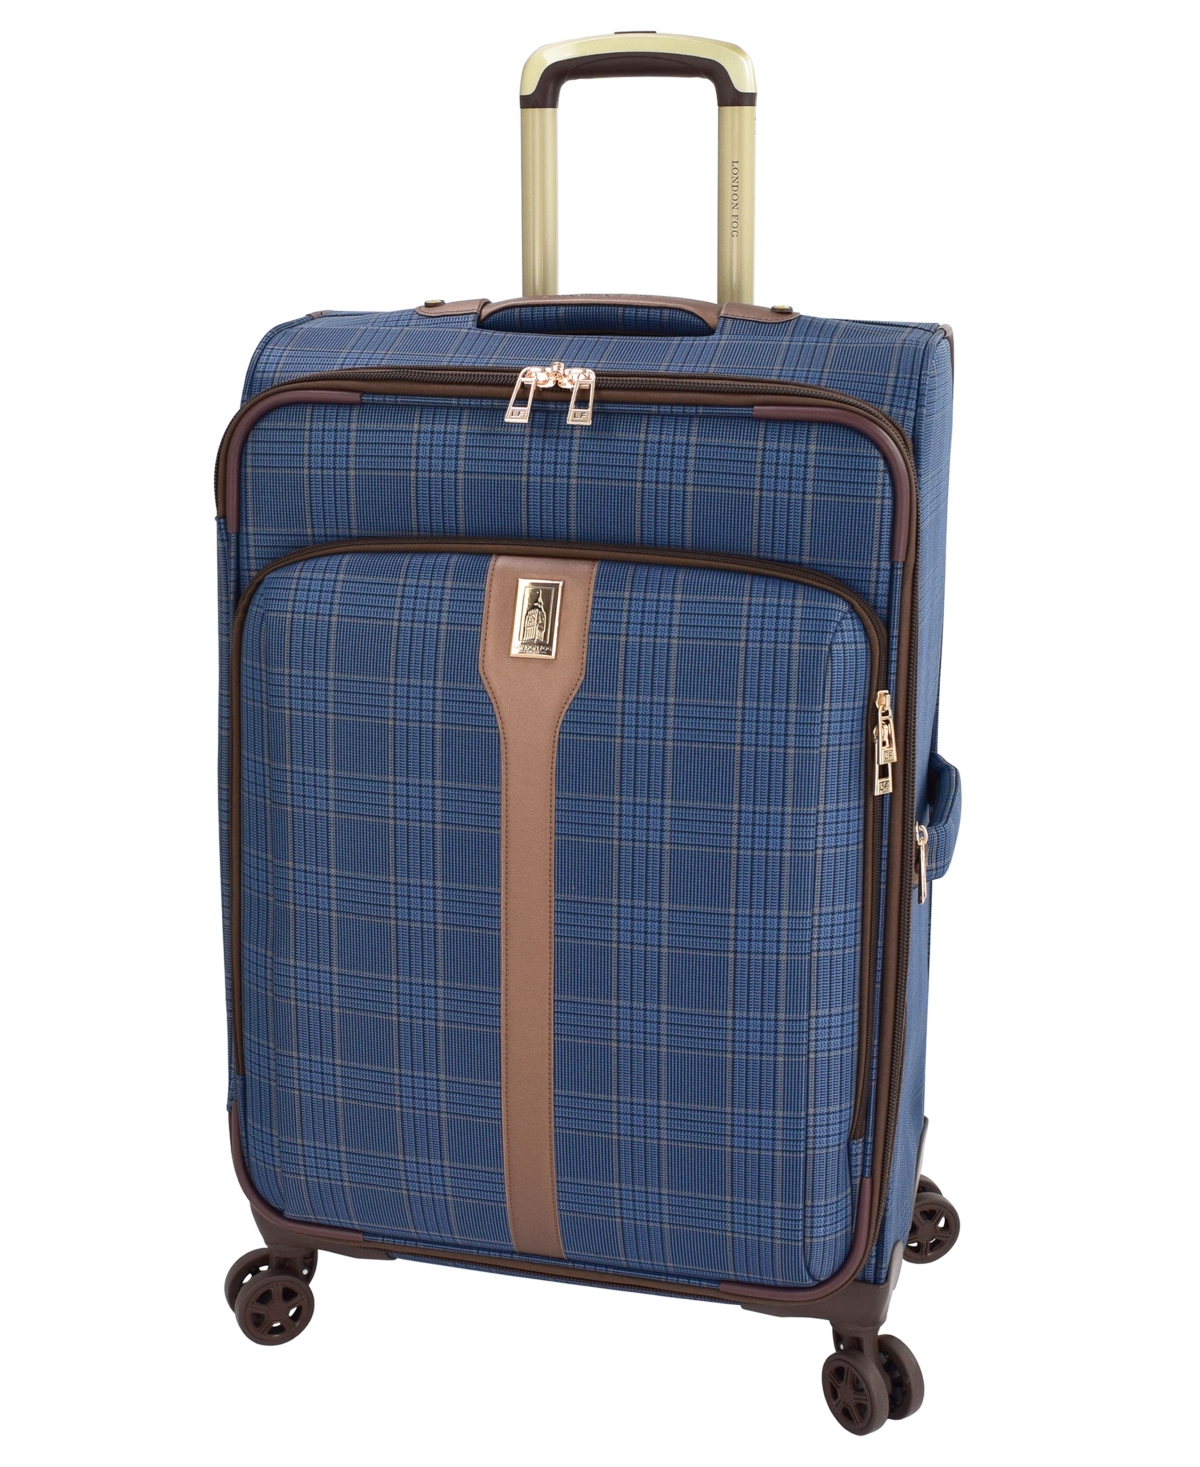 Brentwood Iii 29" Expandable Spinner Soft Side, Created for Macy's - Navy, Bronze